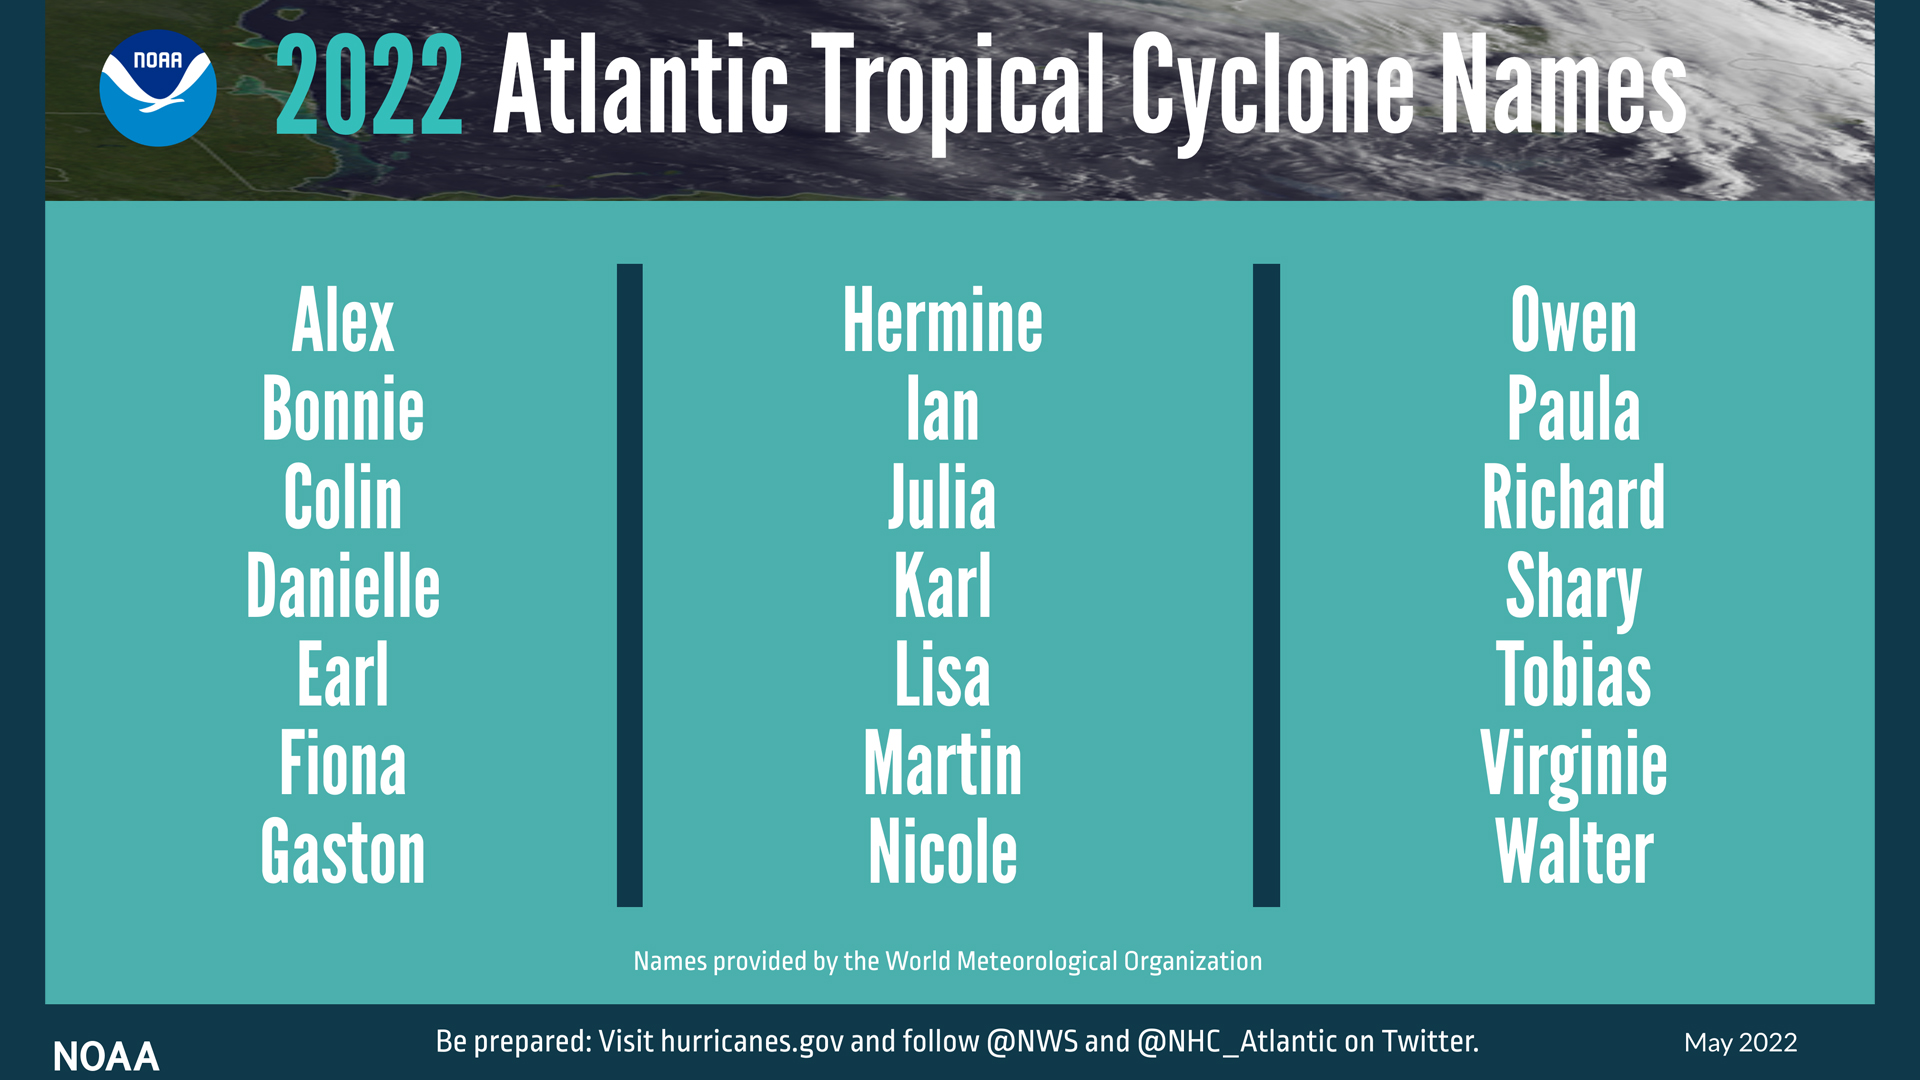 A summary graphic showing an alphabetical list of the 2022 Atlantic tropical cyclone names as selected by the World Meteorological Organization. The official start of the Atlantic hurricane season is June 1 and runs through November 30.